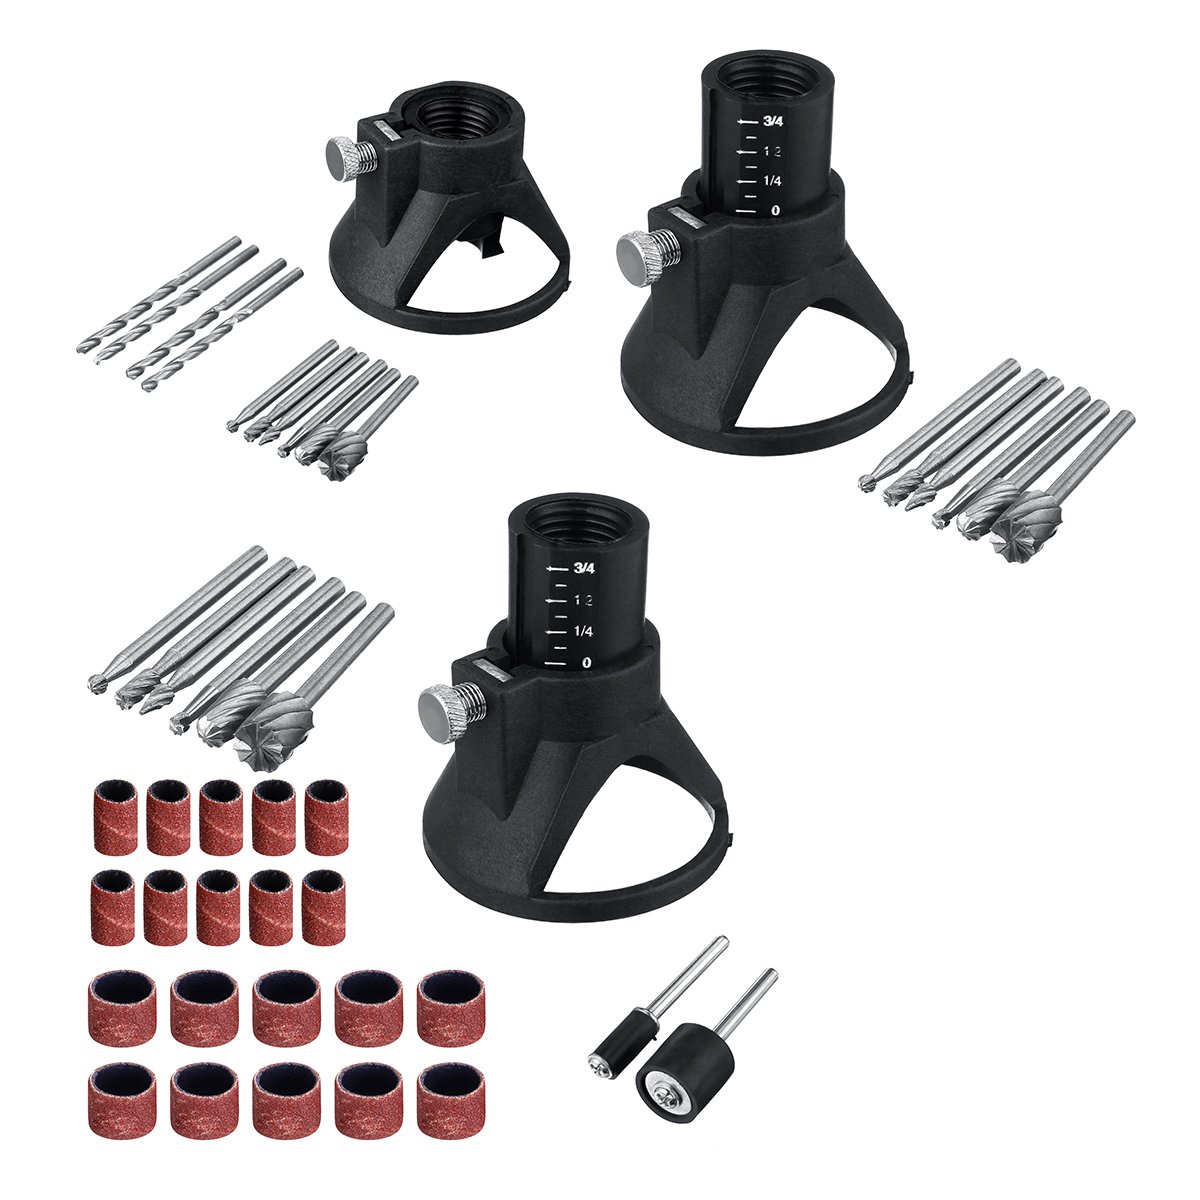 

7/11/29Pcs Rotary Electric Grinder Locator Drill Holder Horn Cap Drill Set